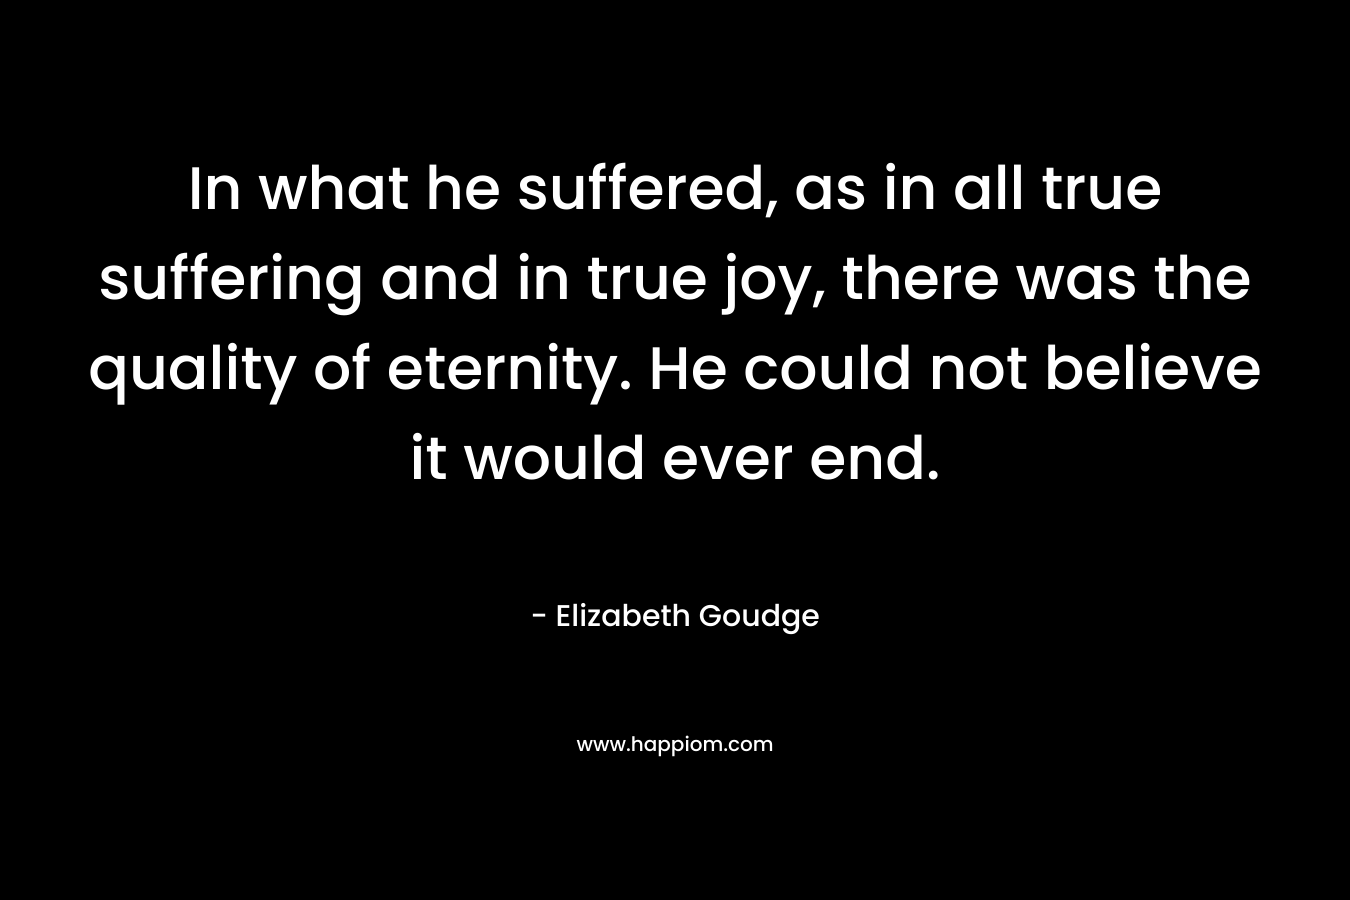 In what he suffered, as in all true suffering and in true joy, there was the quality of eternity. He could not believe it would ever end.